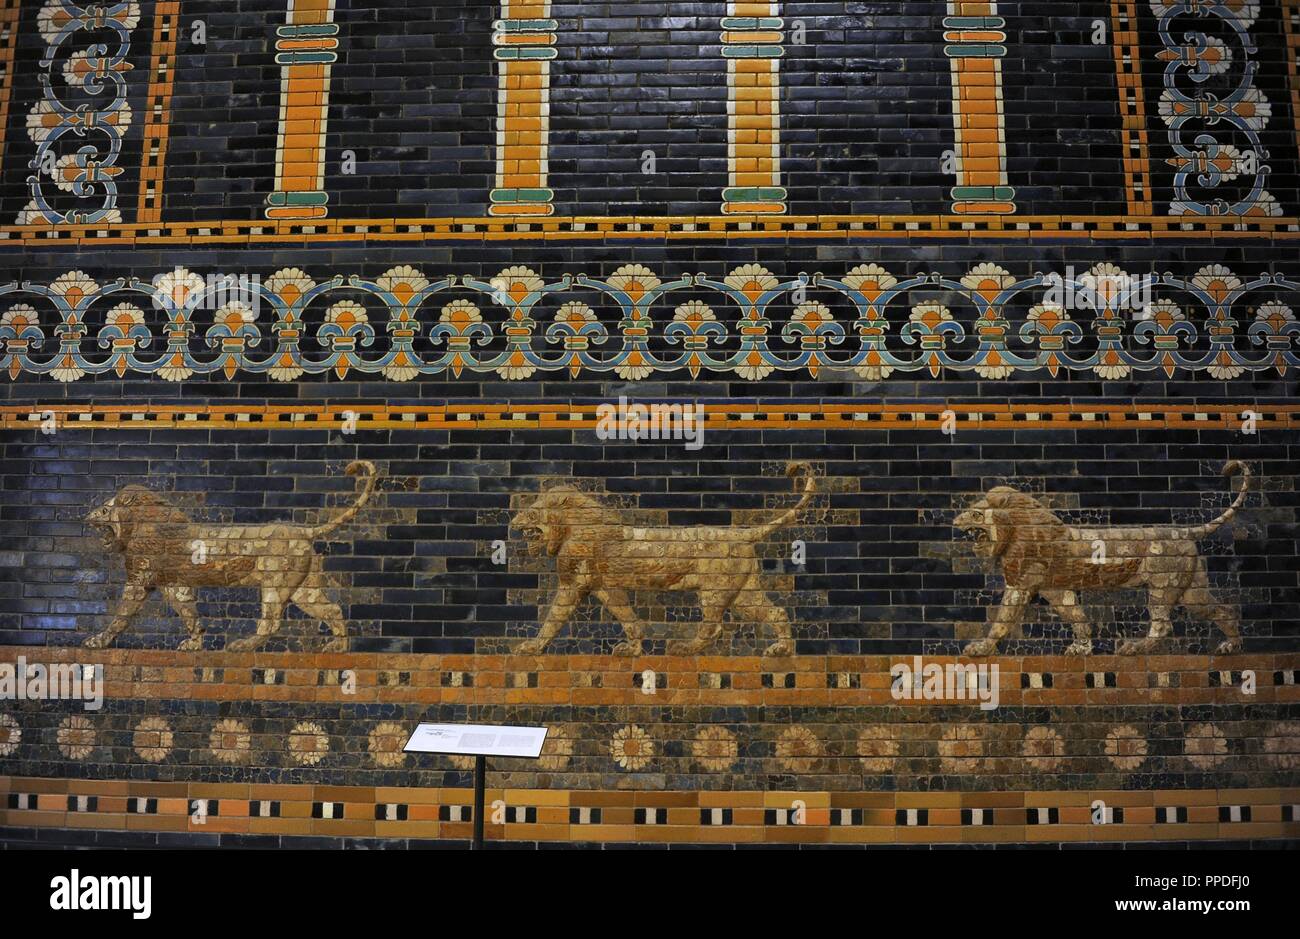 Mesopotamian art. Neo-Babylonian. The Throne Room of Nebuchadnezzar II.  Reconstructed facade. Dated in 580 . Its 56 meters facade was decorated  with colored glazed bricks as shows the composition, including stylized  palms.